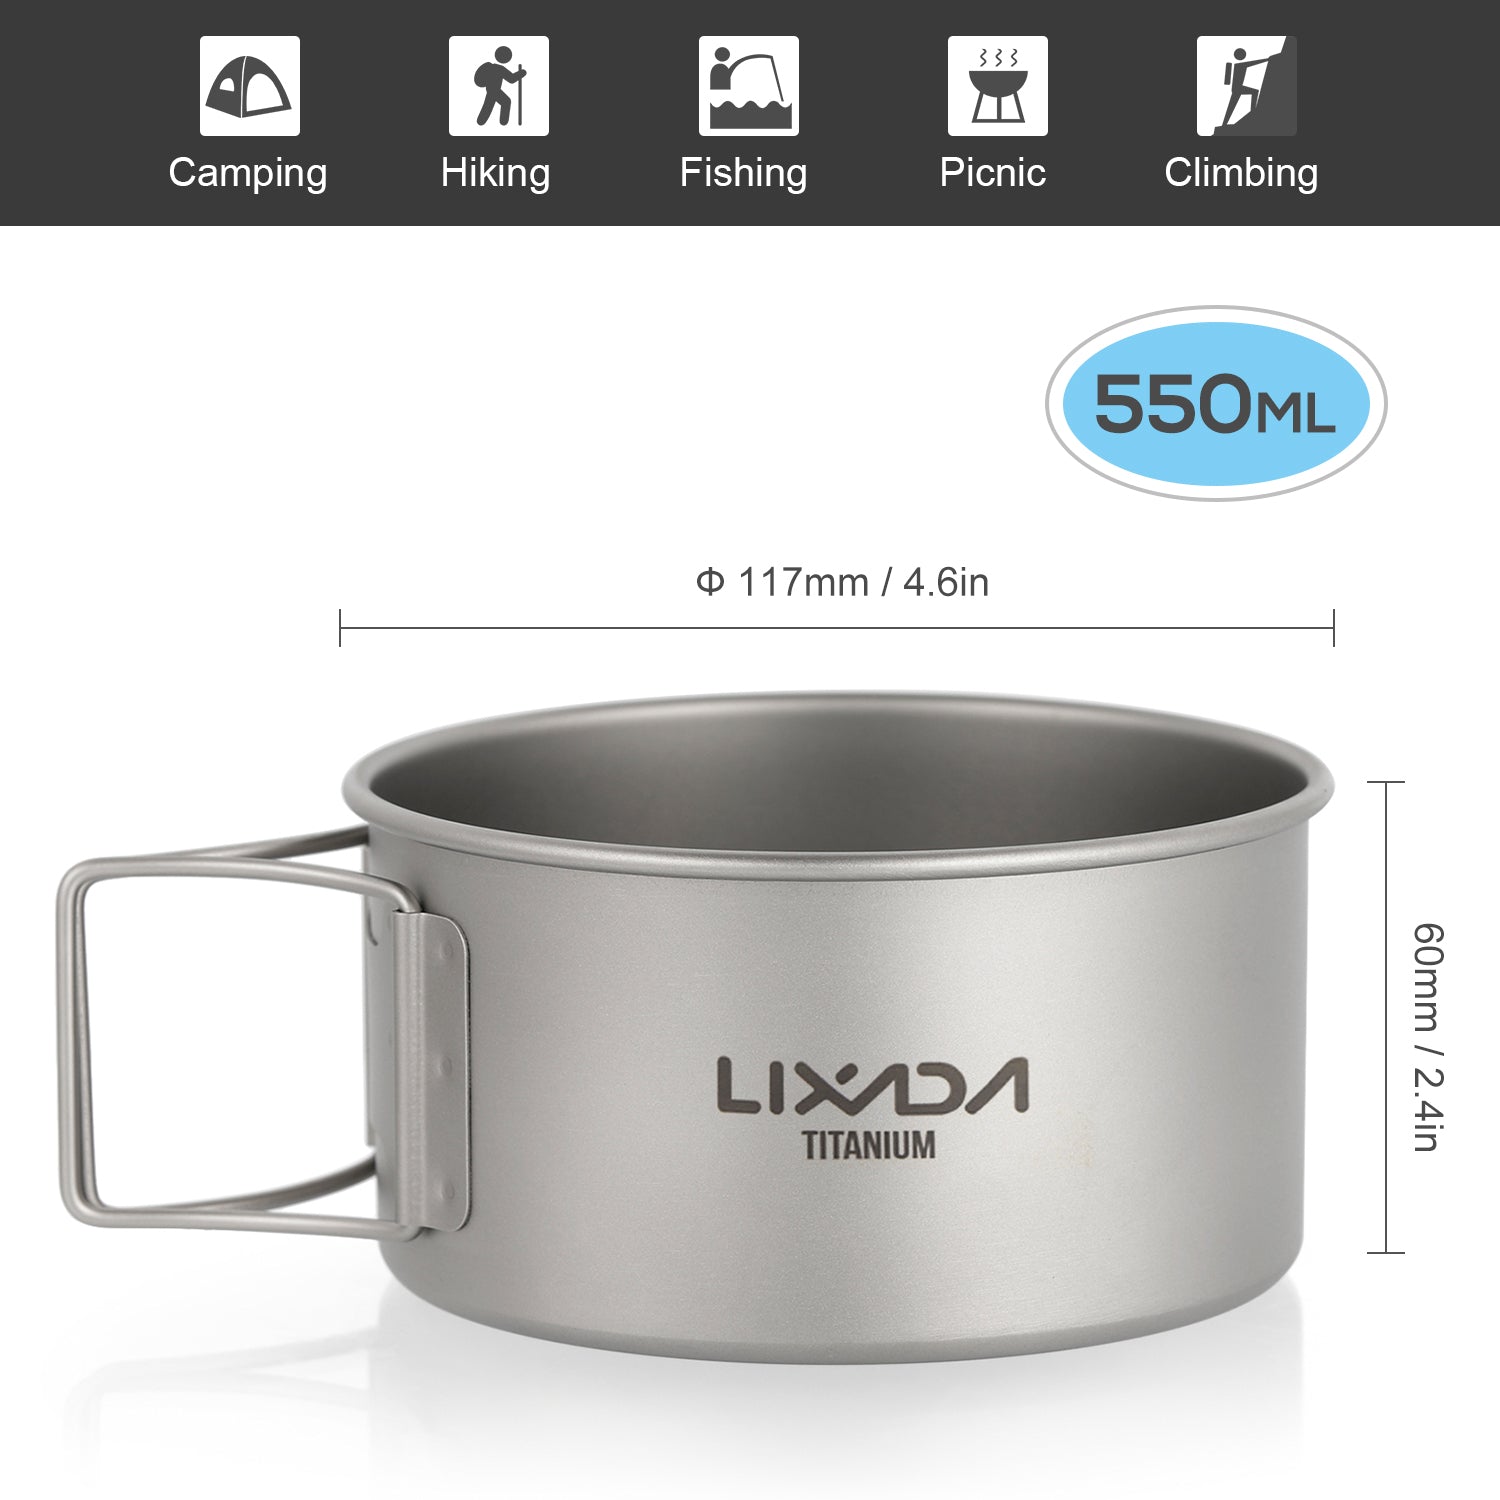 Lixada Titanium Bowl with Folding Handles Dinner Food Container for Outdoor Camping Hiking Backpacking